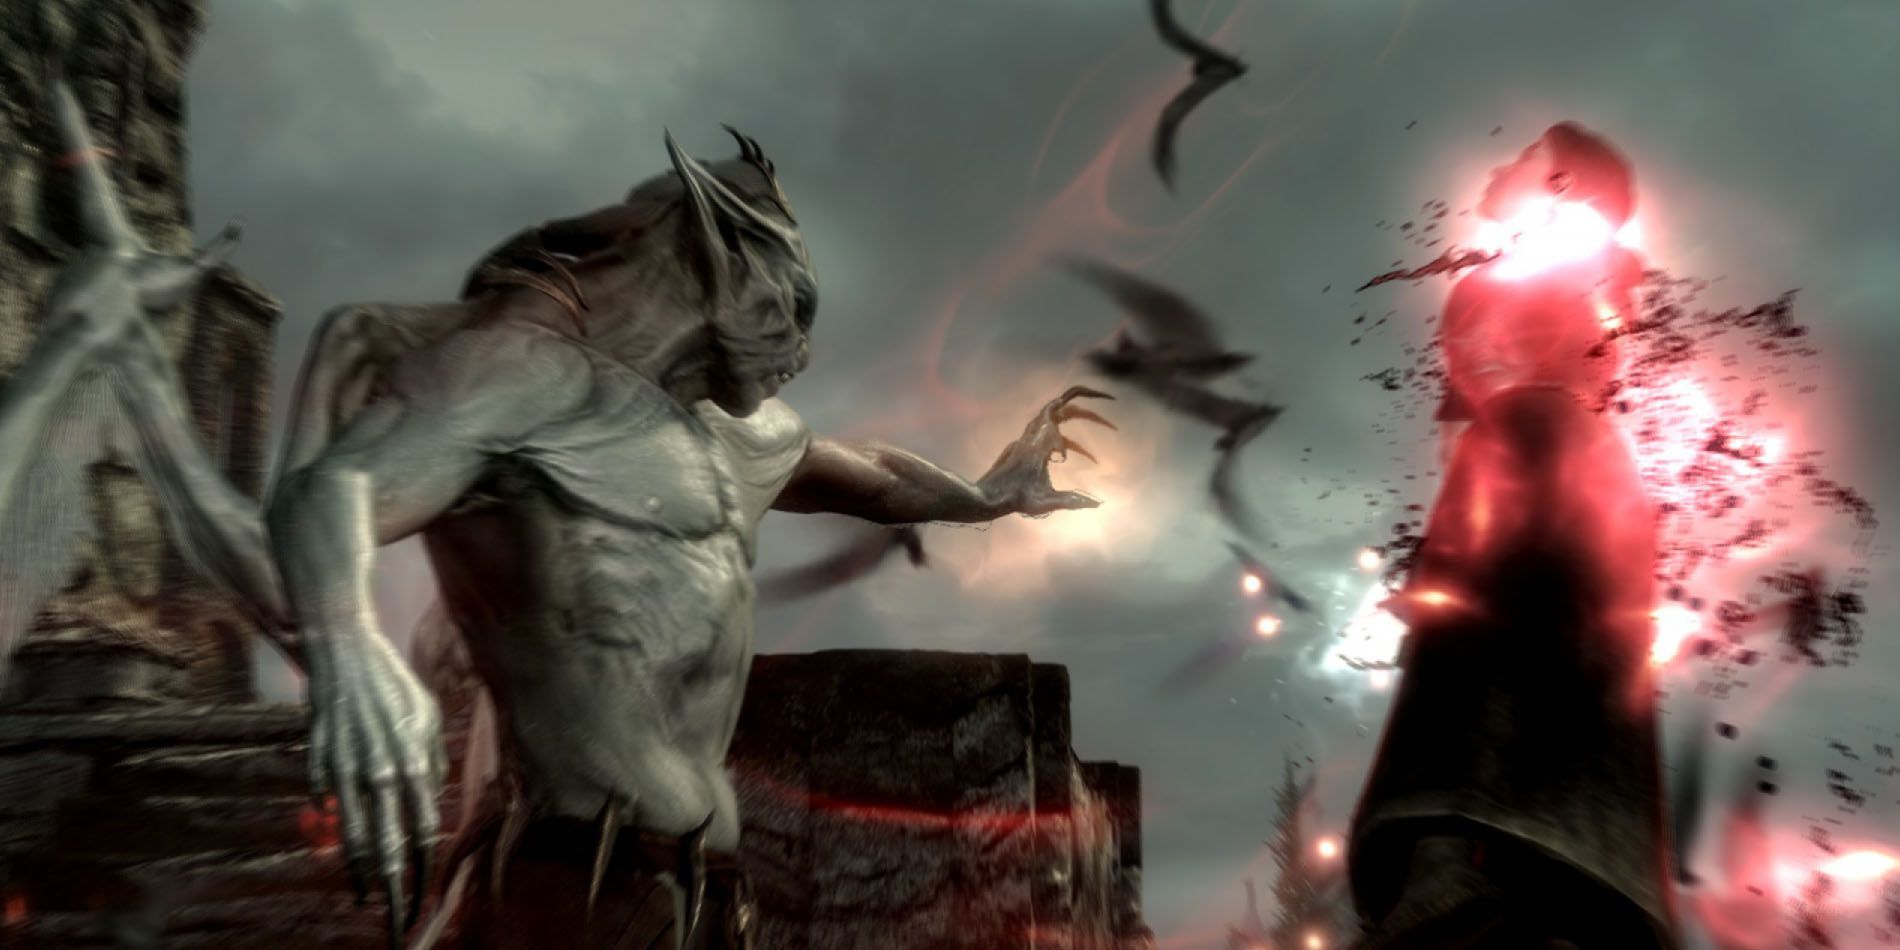 An image of a vampire lord in Skyrim using a magical drain attack on their opponent